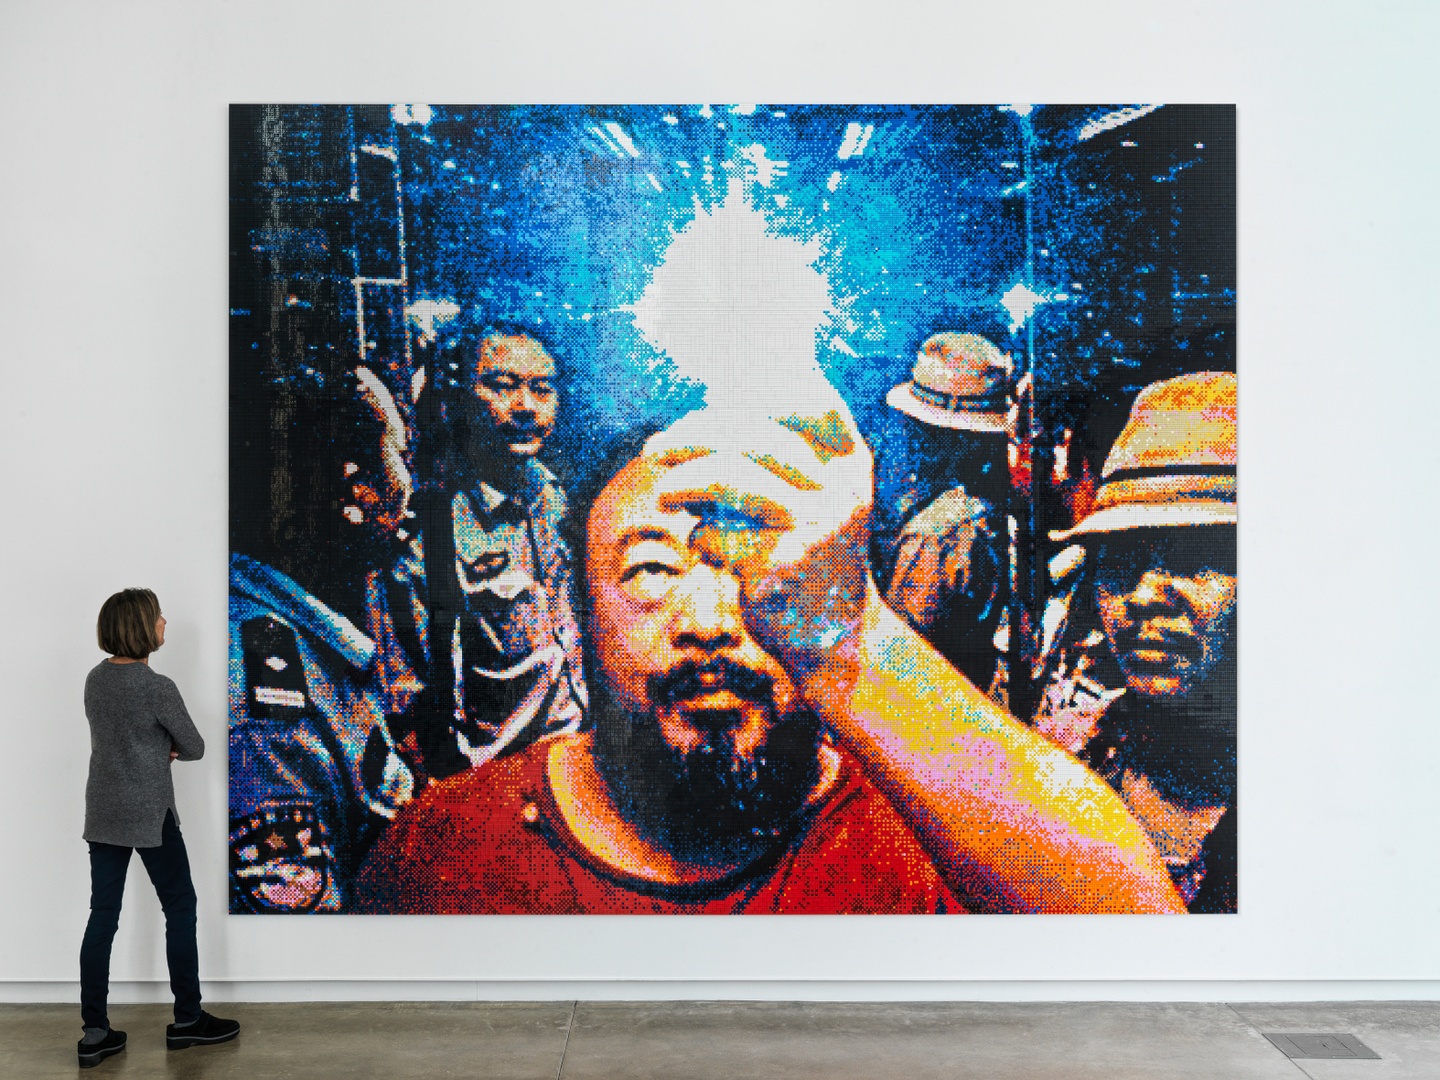 Installation view of person standing next to large Lego version of a photo of men in an elevator, one holding cell-phone camera to a mirror to take a selfie, the flash visible